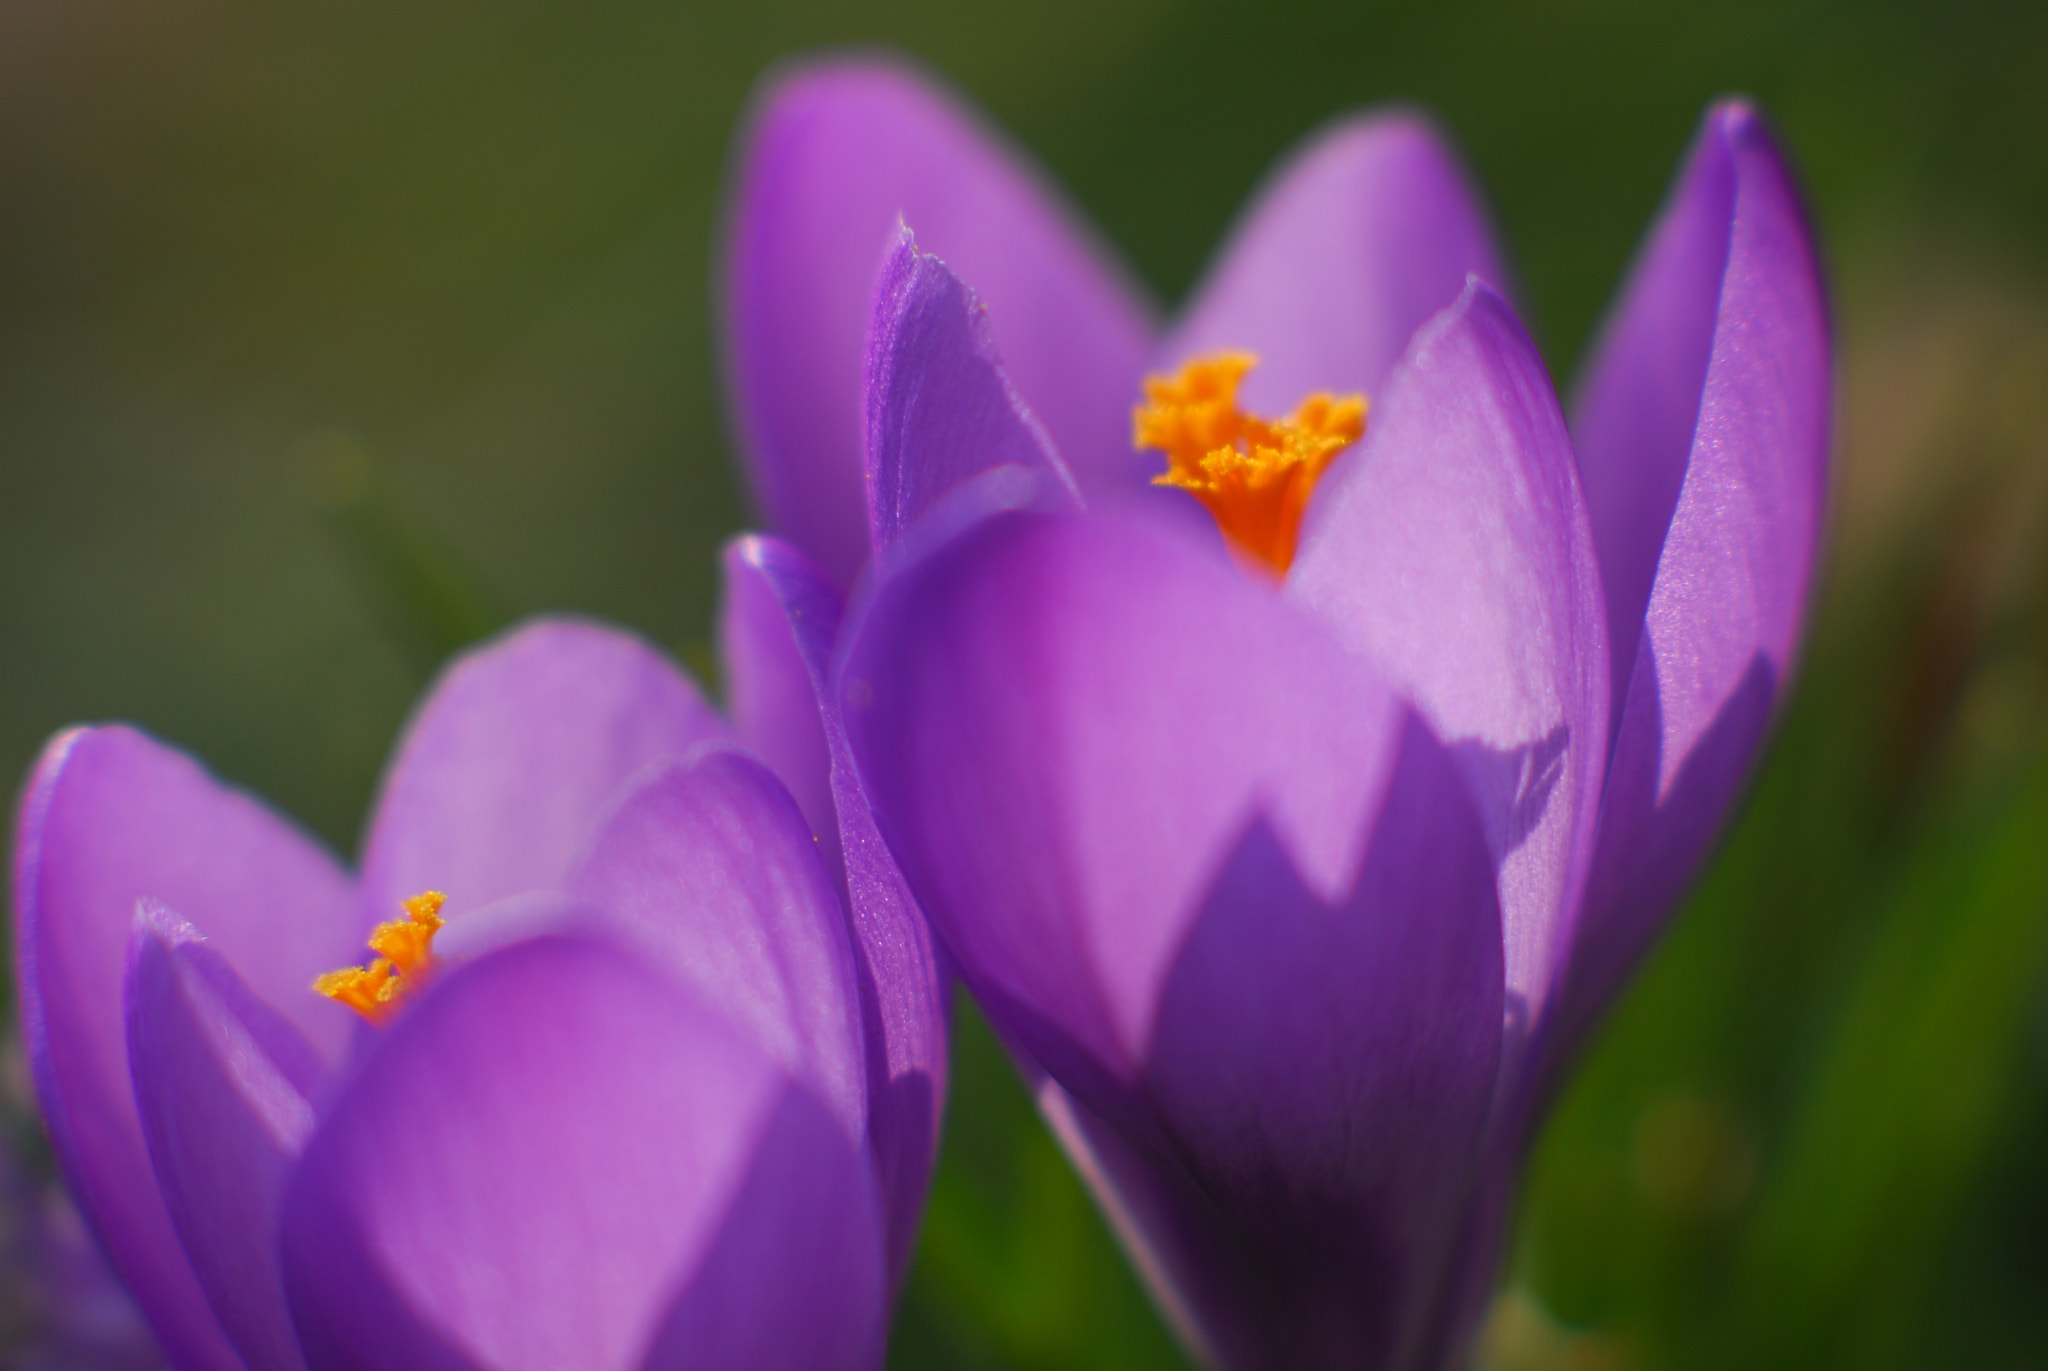 Nikon D200 sample photo. Early spring flowers photography